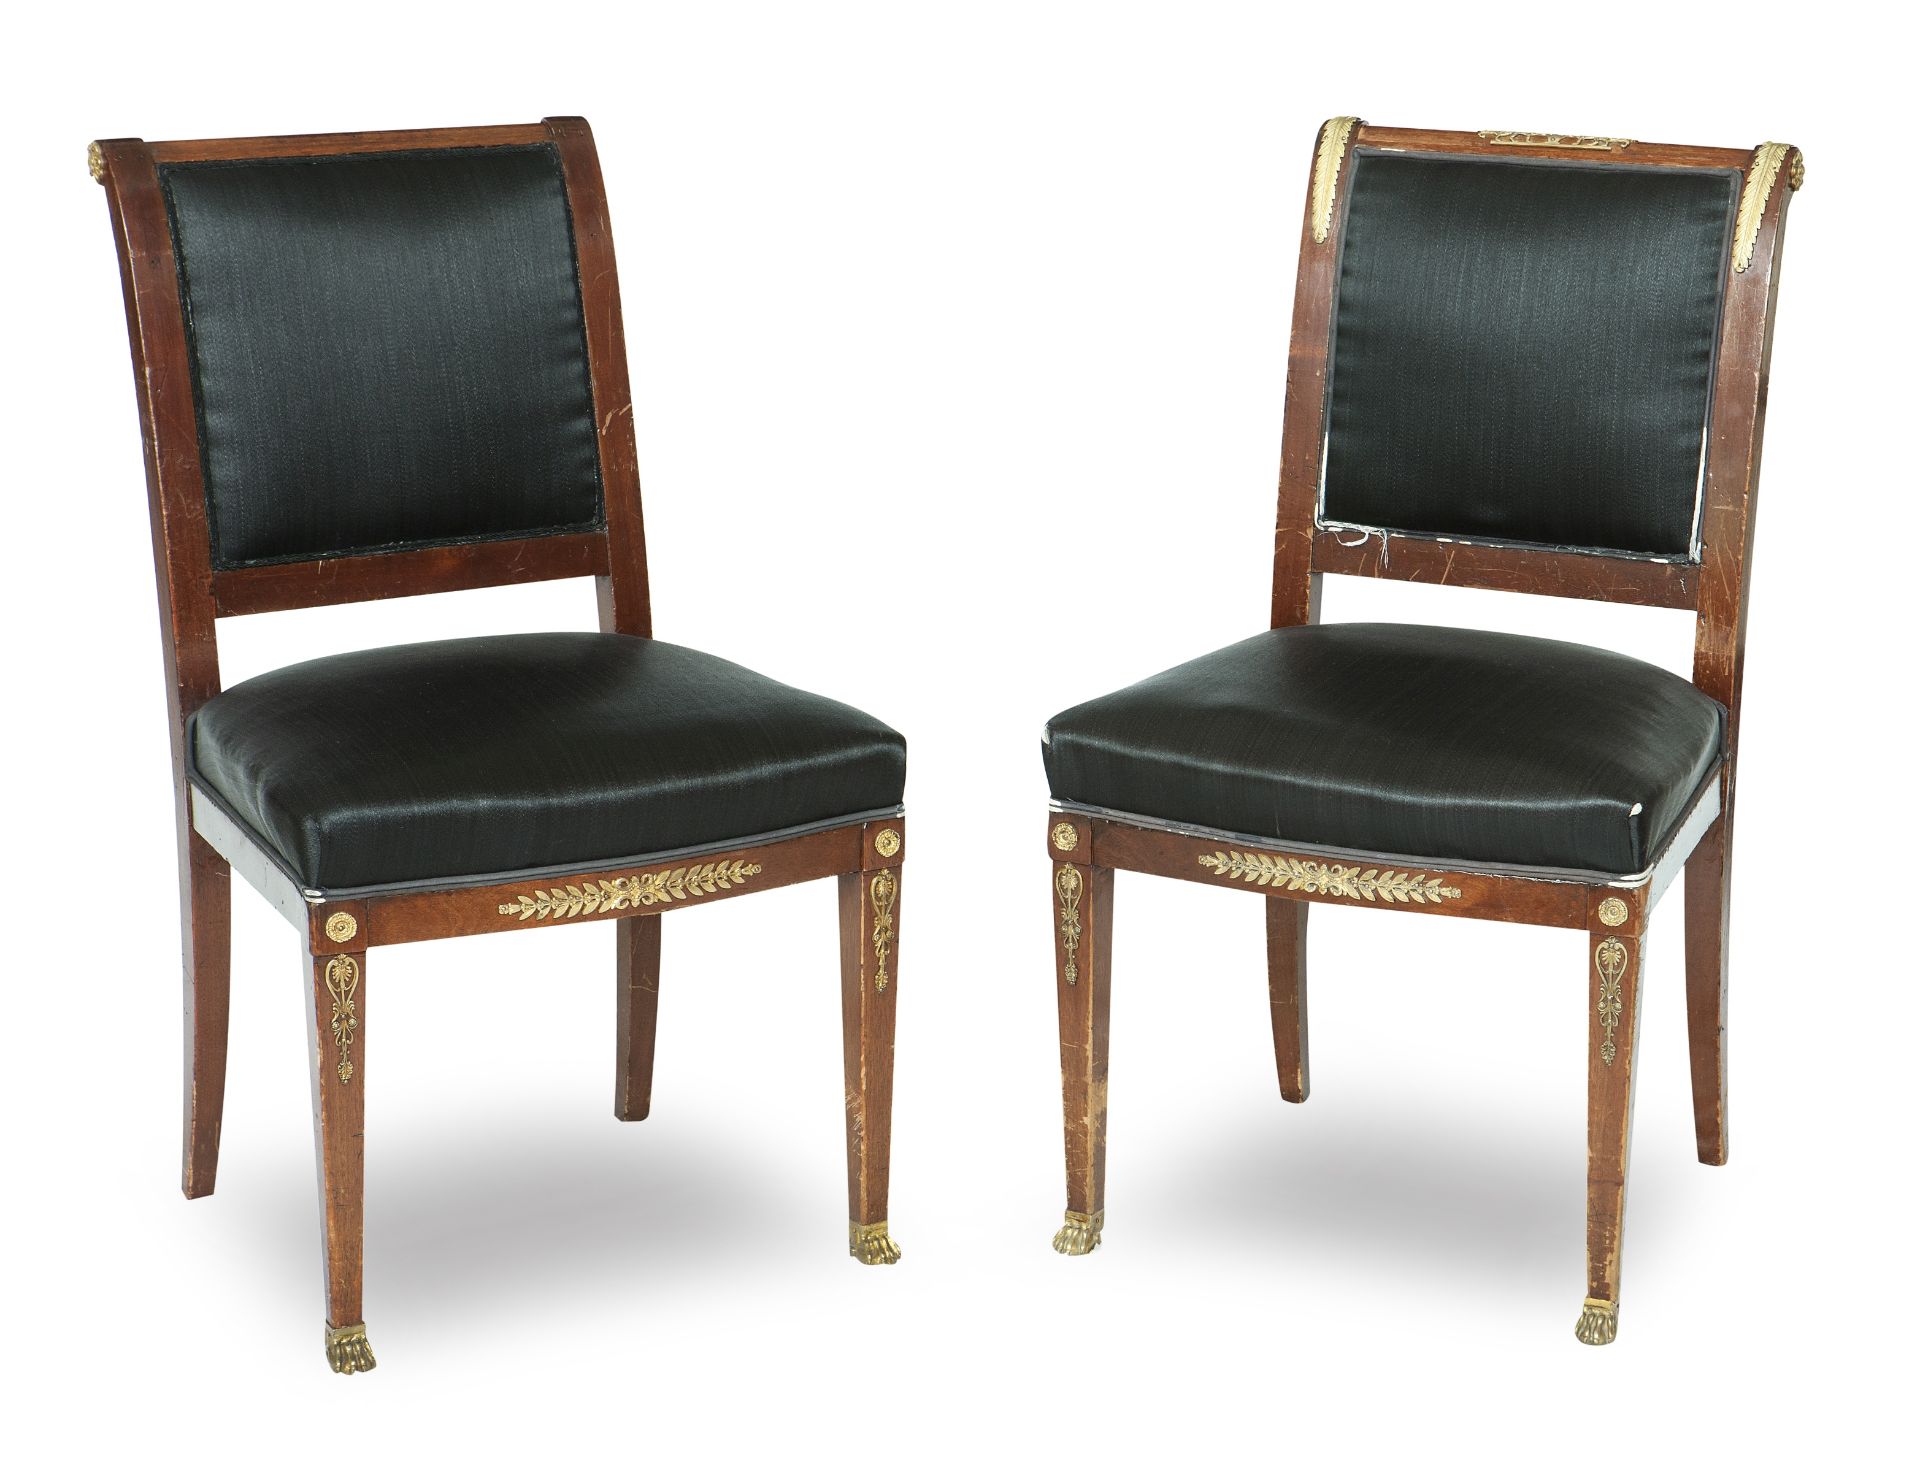 A pair of Empire Revival mahogany chairs, late 19th/early 20th century (2)